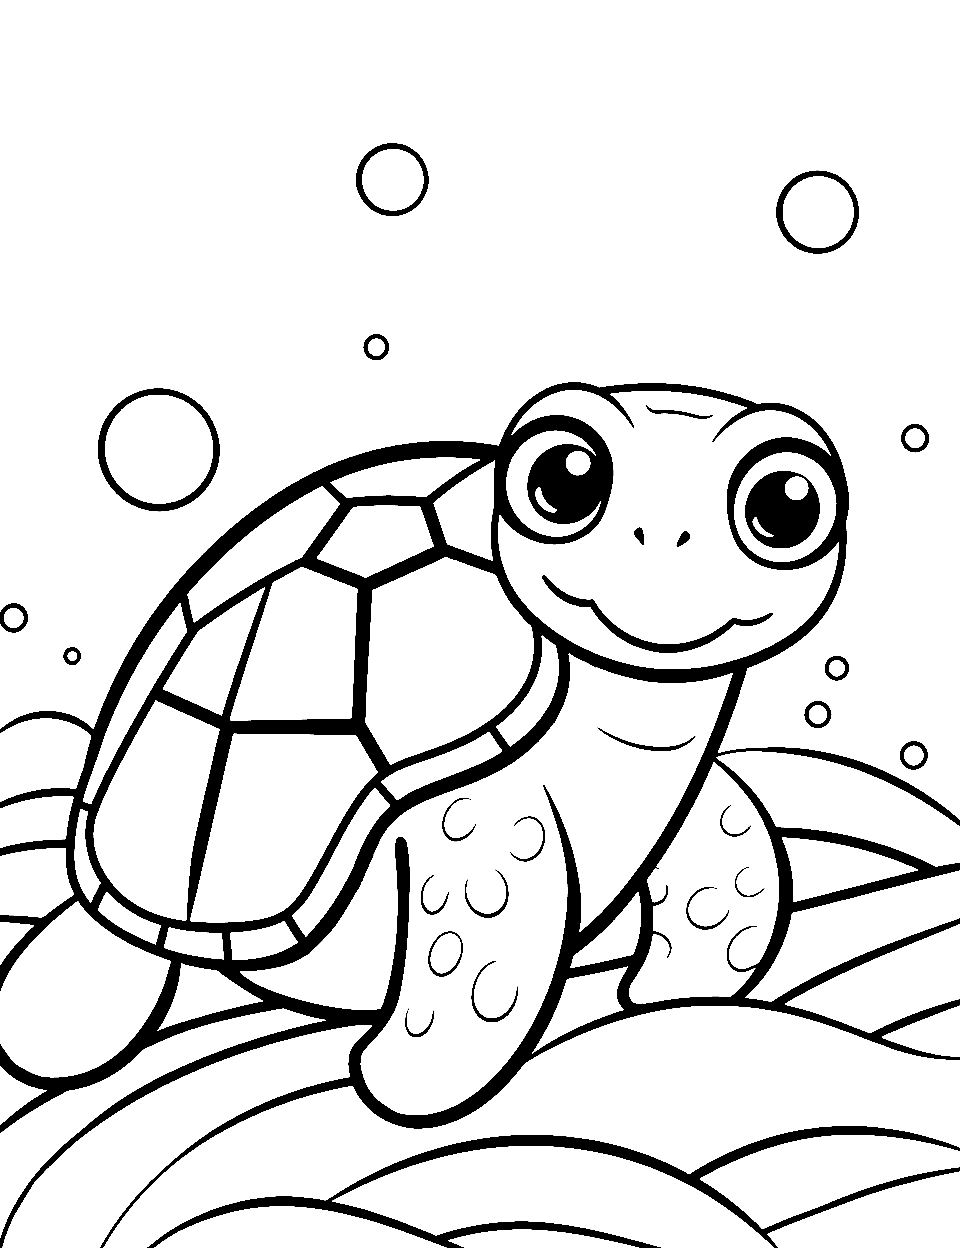 Turtle's Kawaii Smile Turtle Coloring Page - A kawaii-style turtle with big, sparkling eyes.